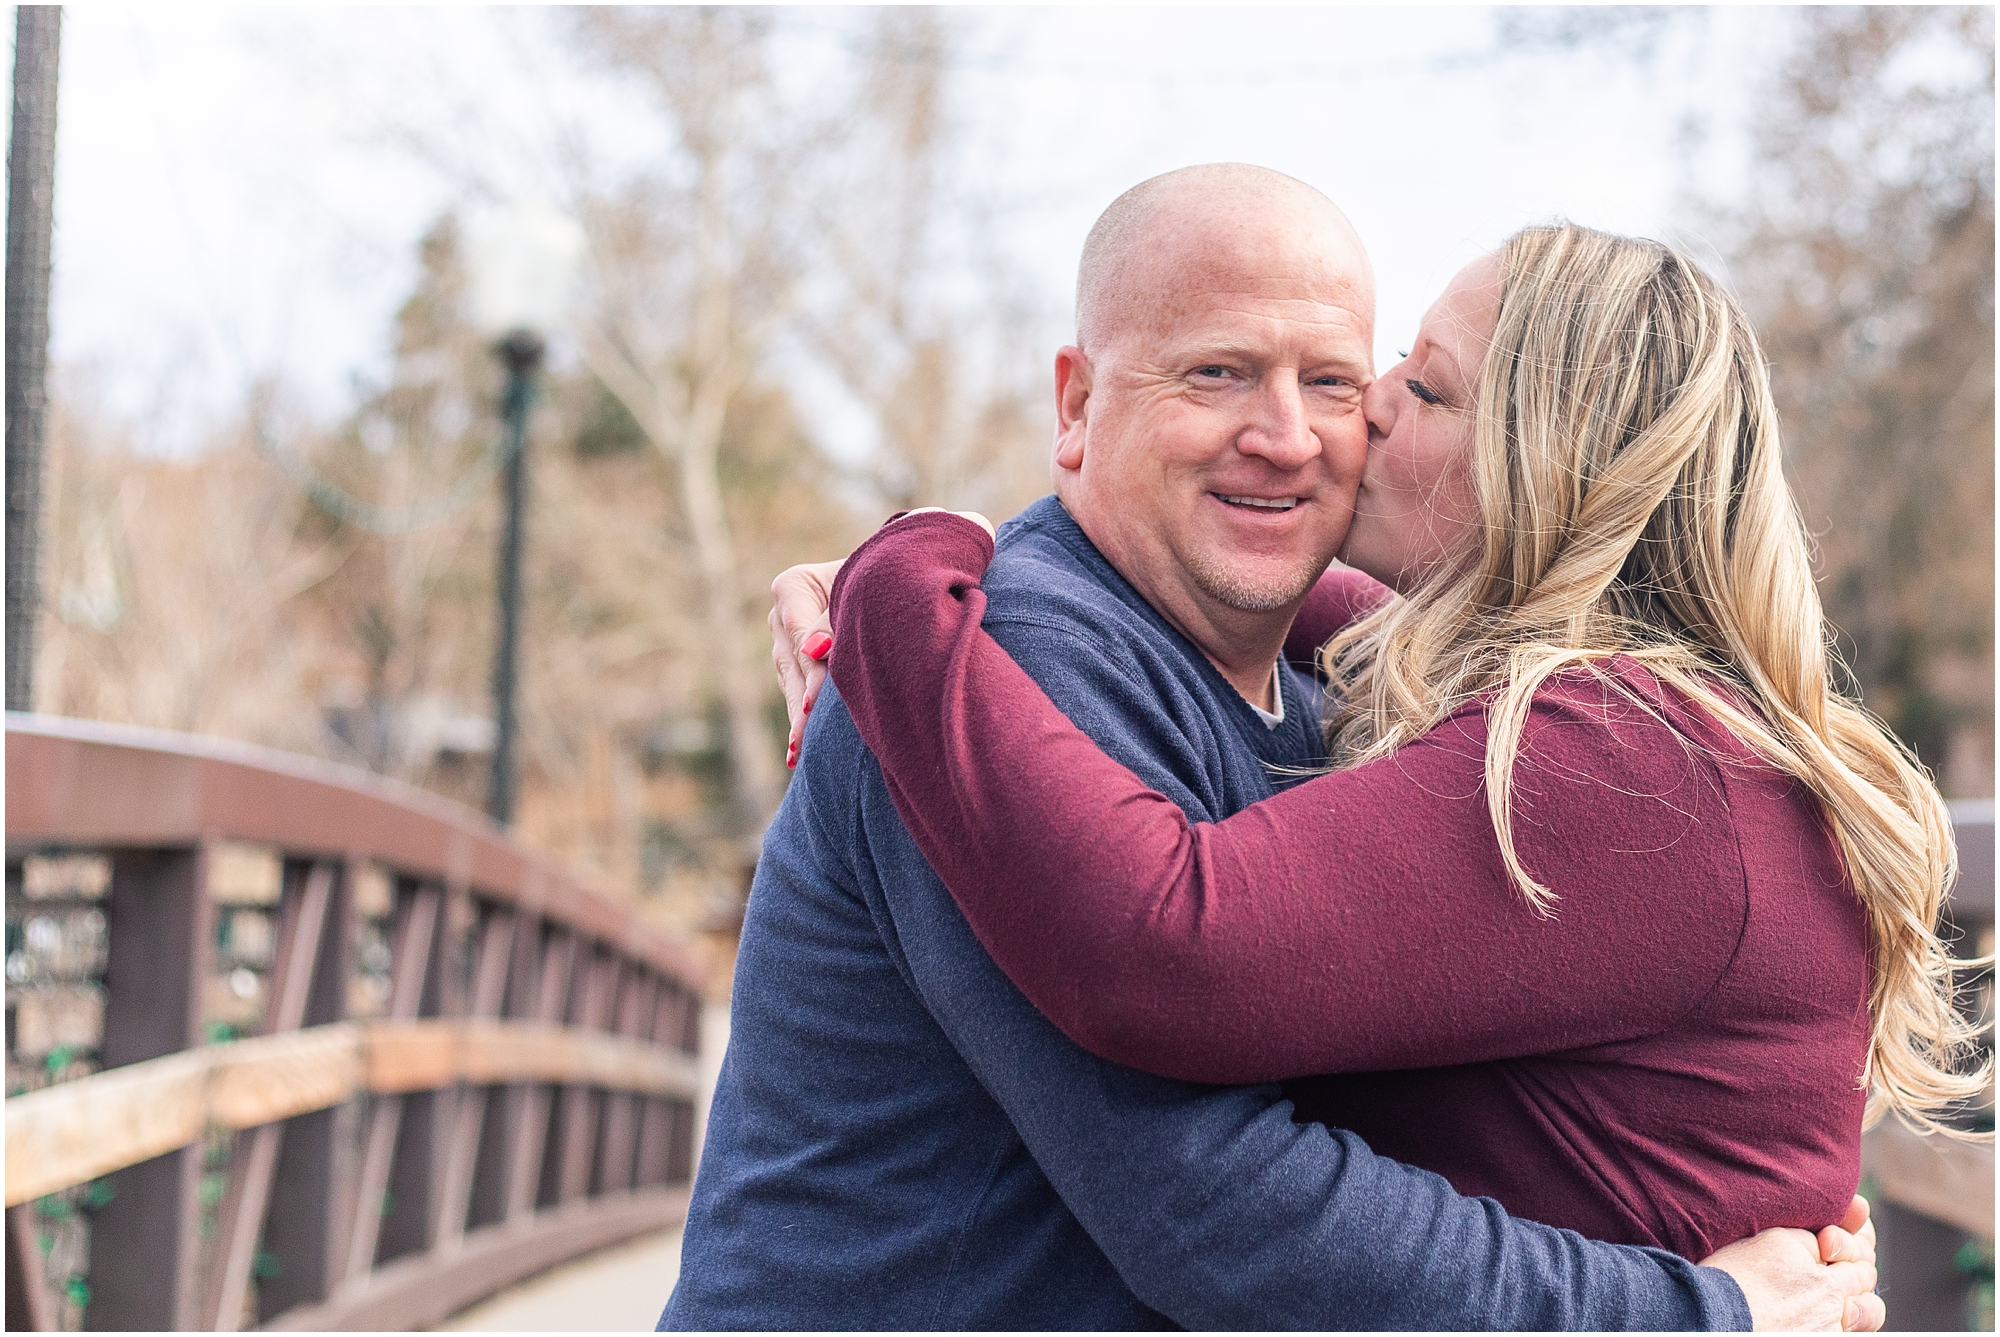 Crystal and Robs Engagement and Family photo session in Golden Colorado at Clear Creek History Park